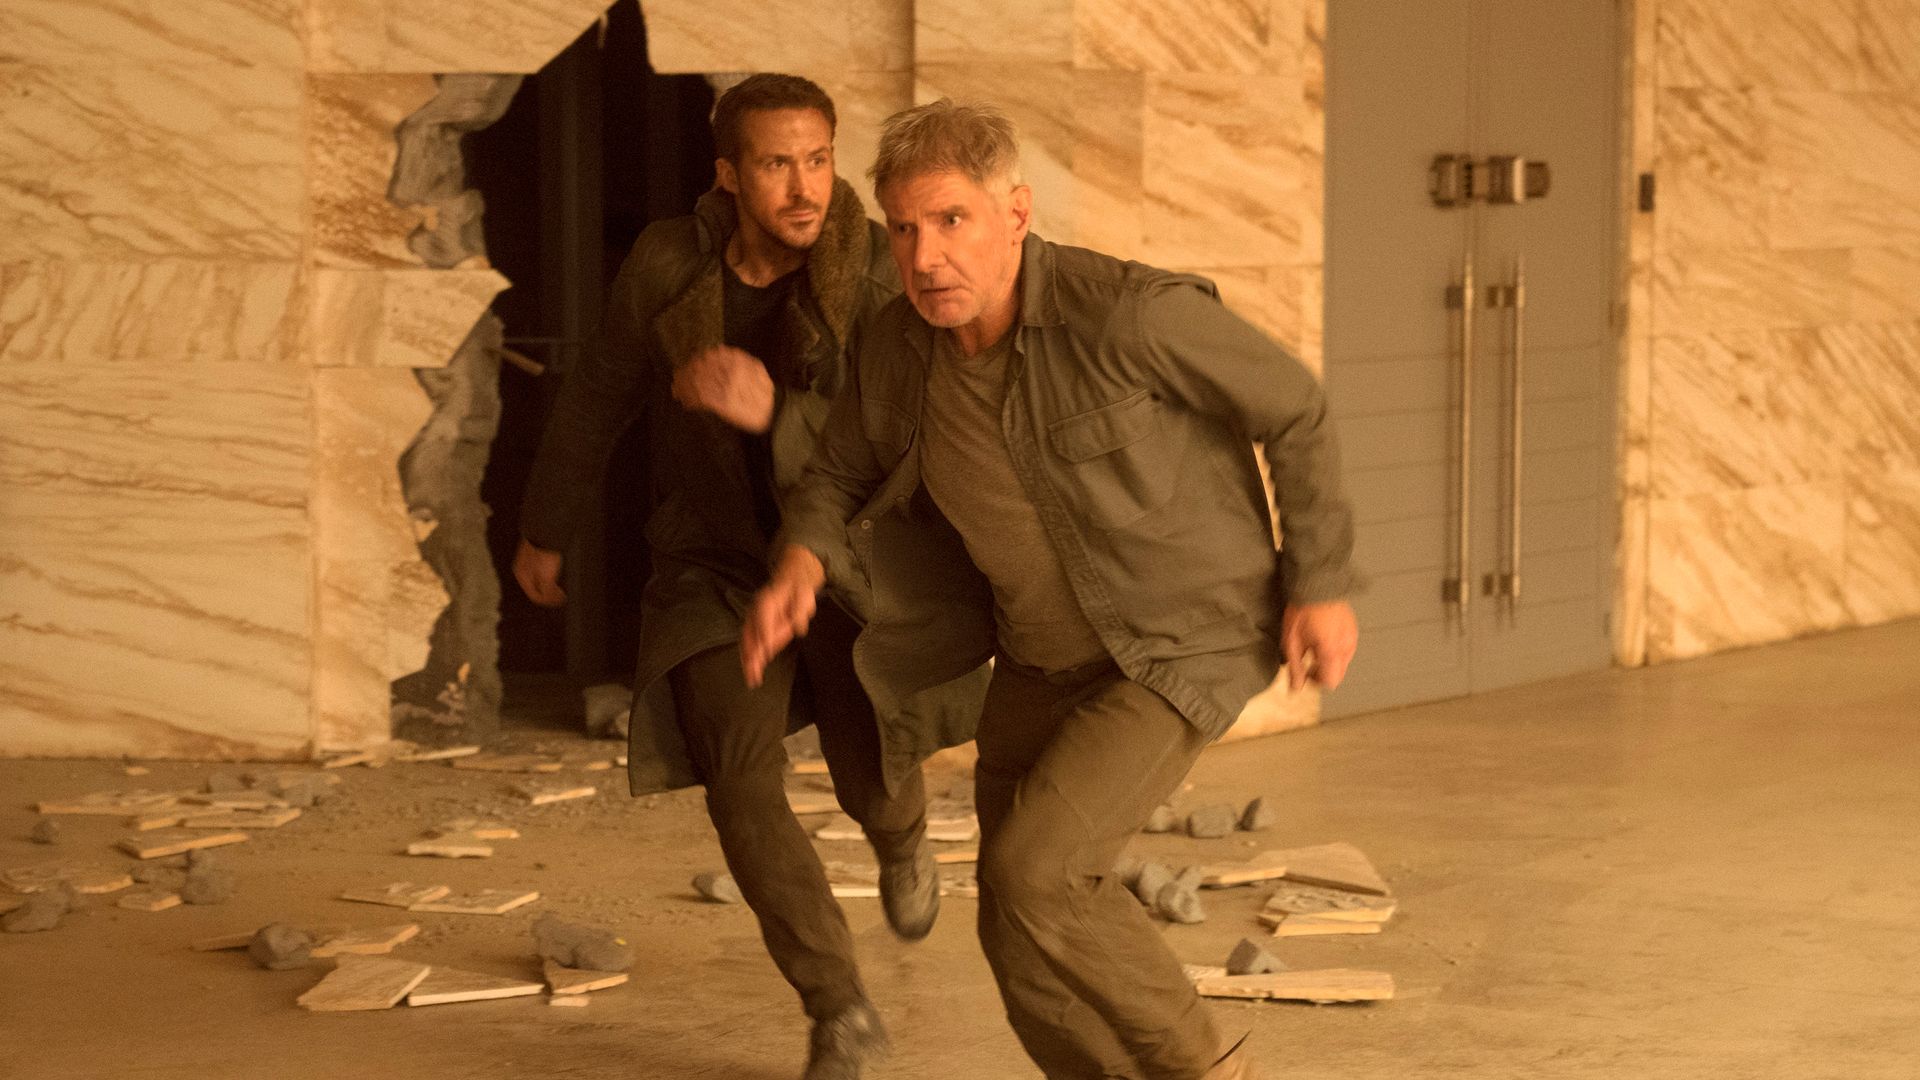 Ryan stars with Harrison Ford in Blade Runner 2049